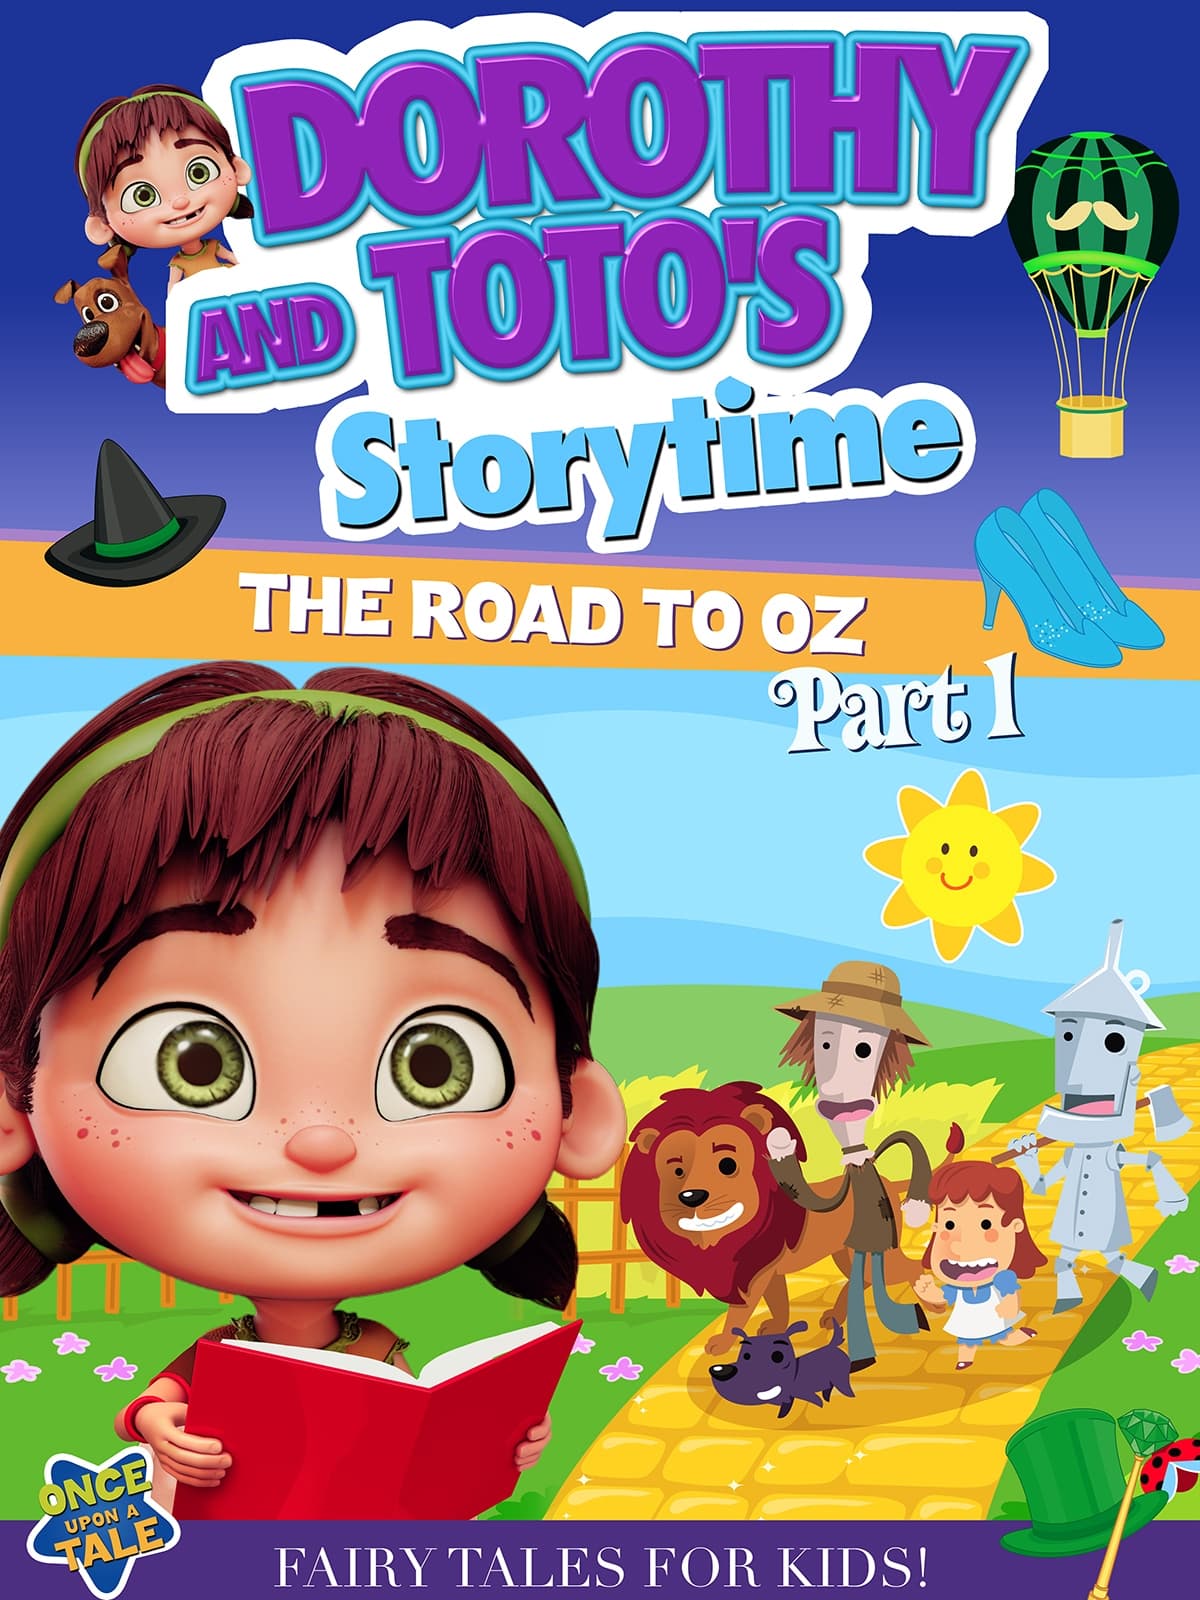 Dorothy And Toto's Storytime: The Road To Oz Part 1